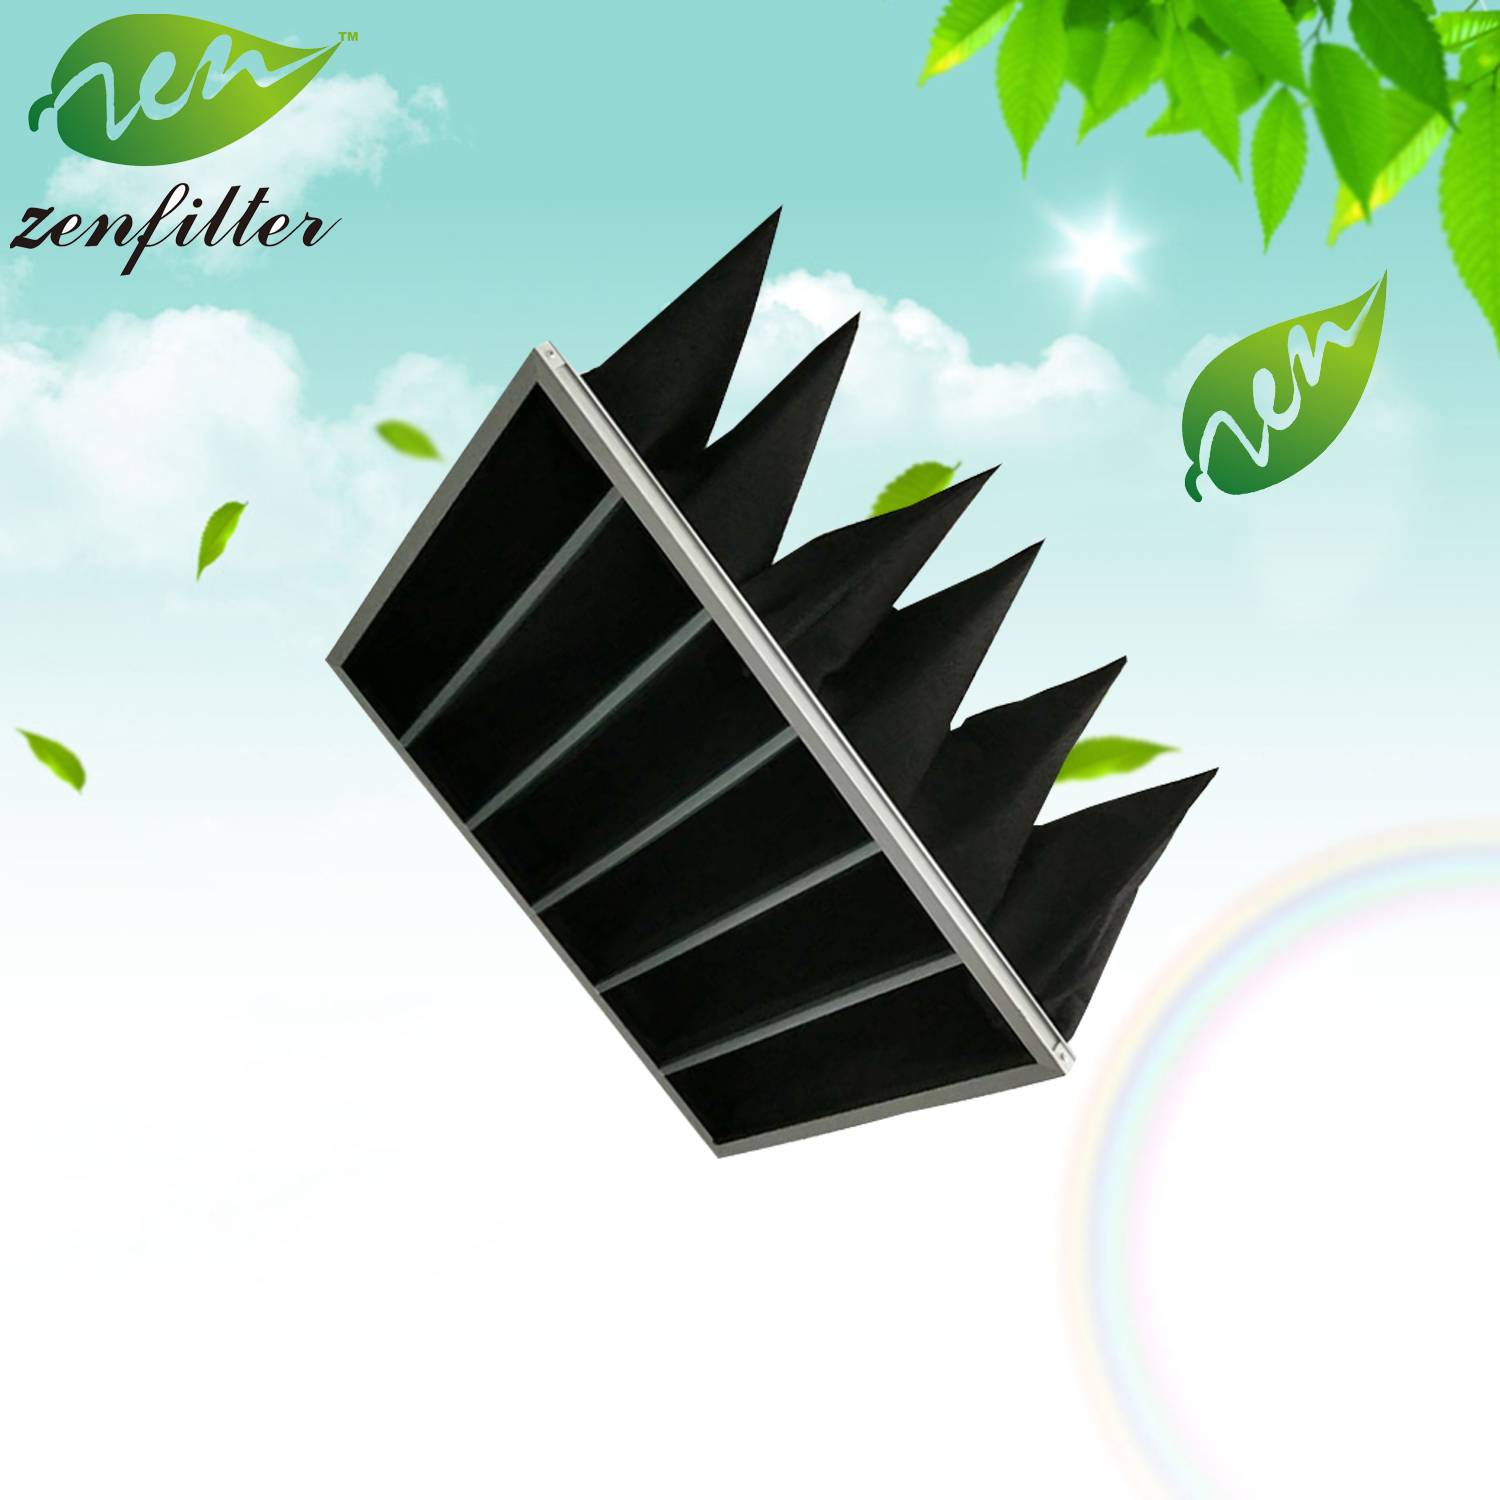 Activated Carbon Pocket (bag) Filter Featured Image